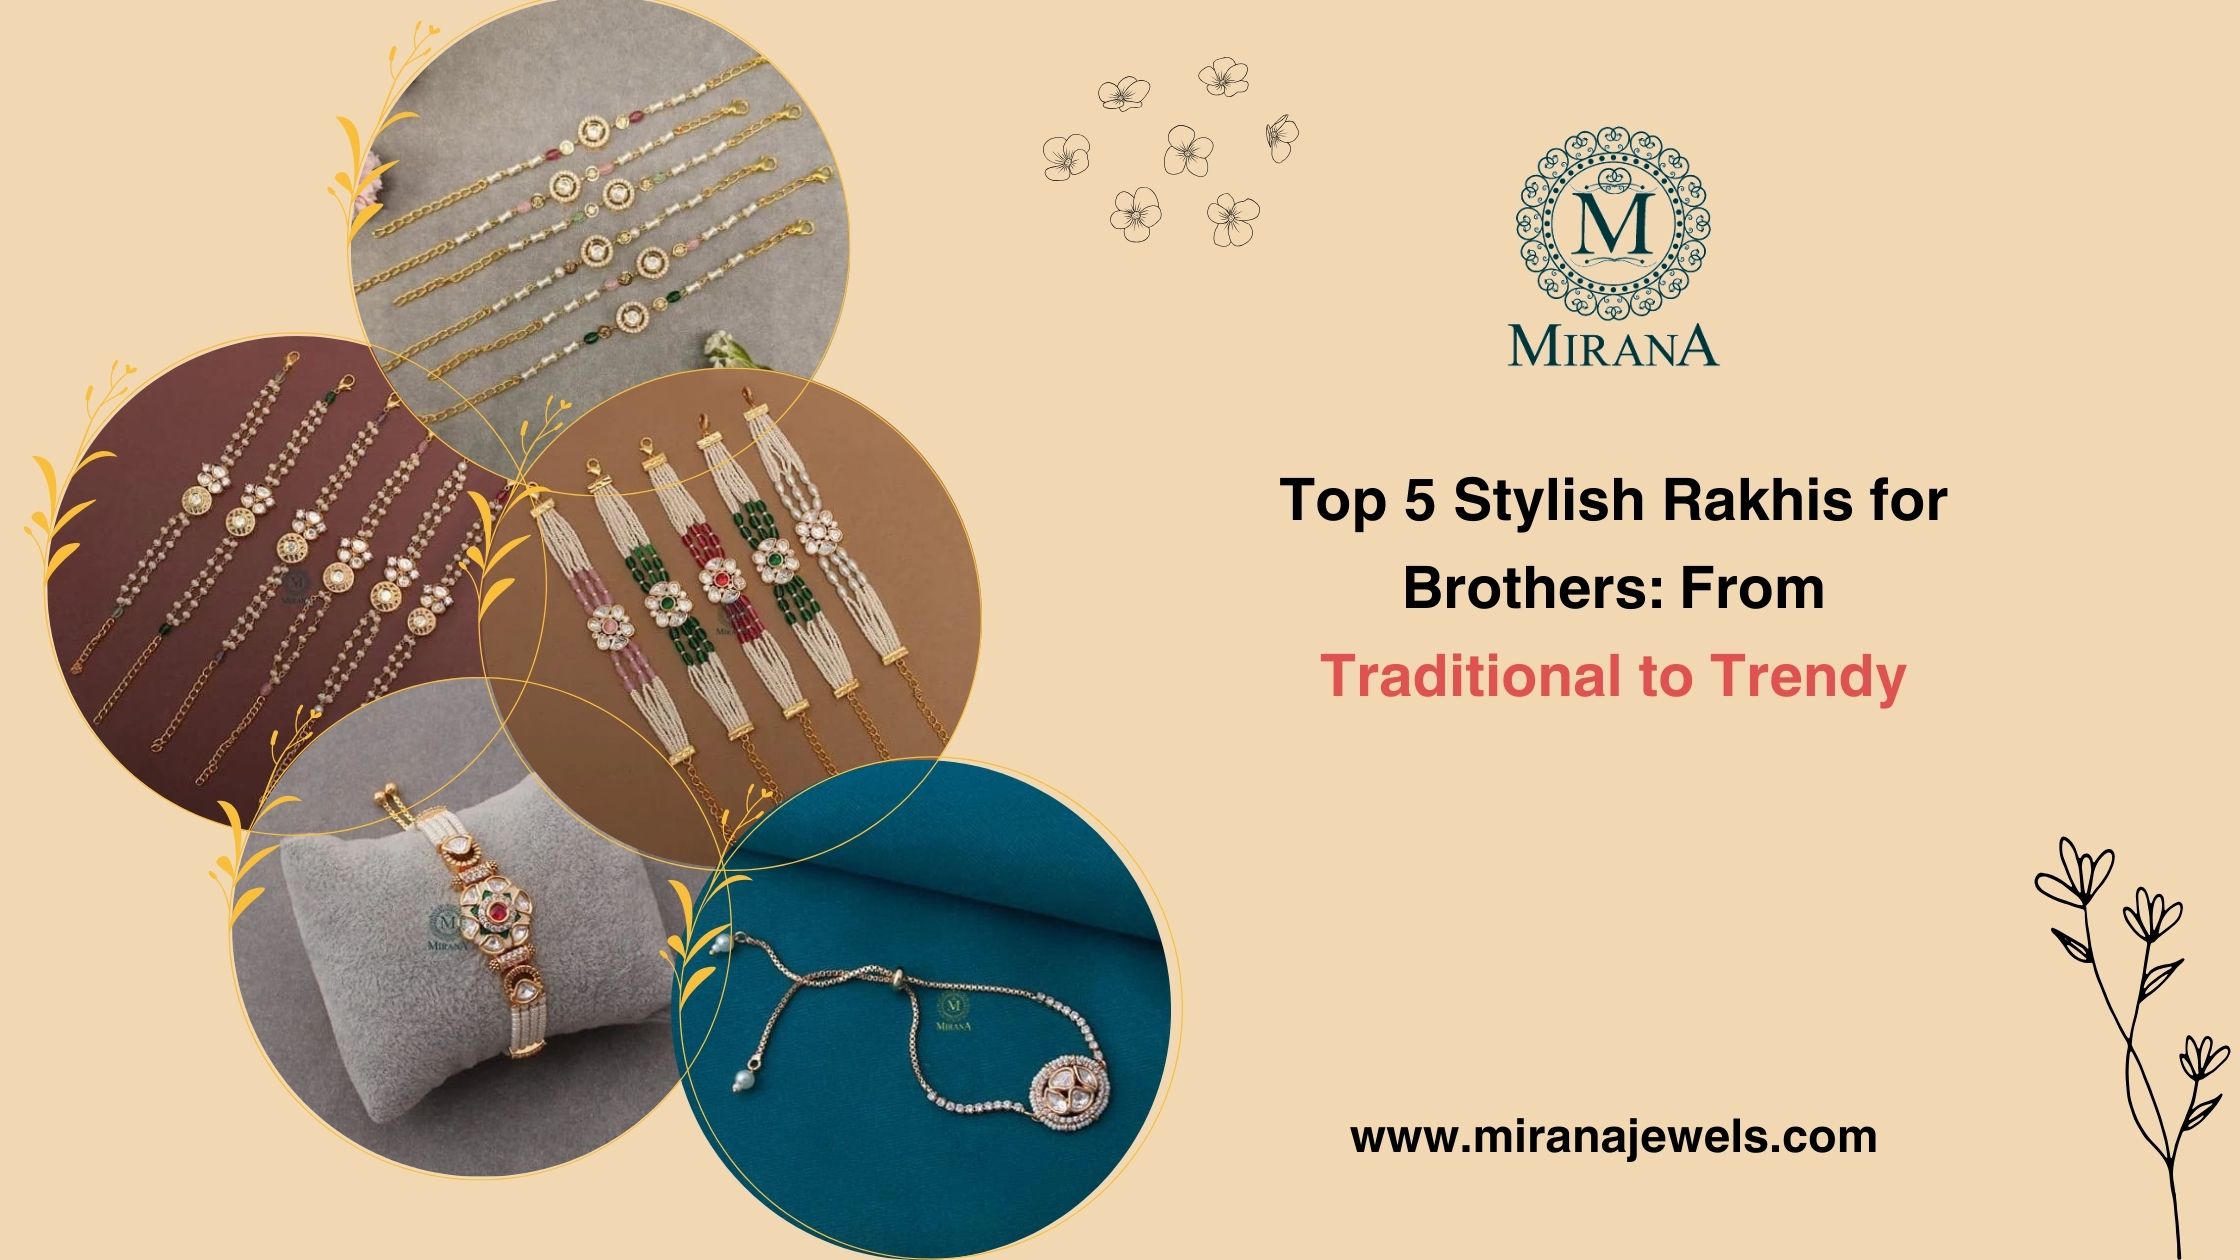 Top 5 Stylish Rakhis for Brothers: From Traditional to Trendy